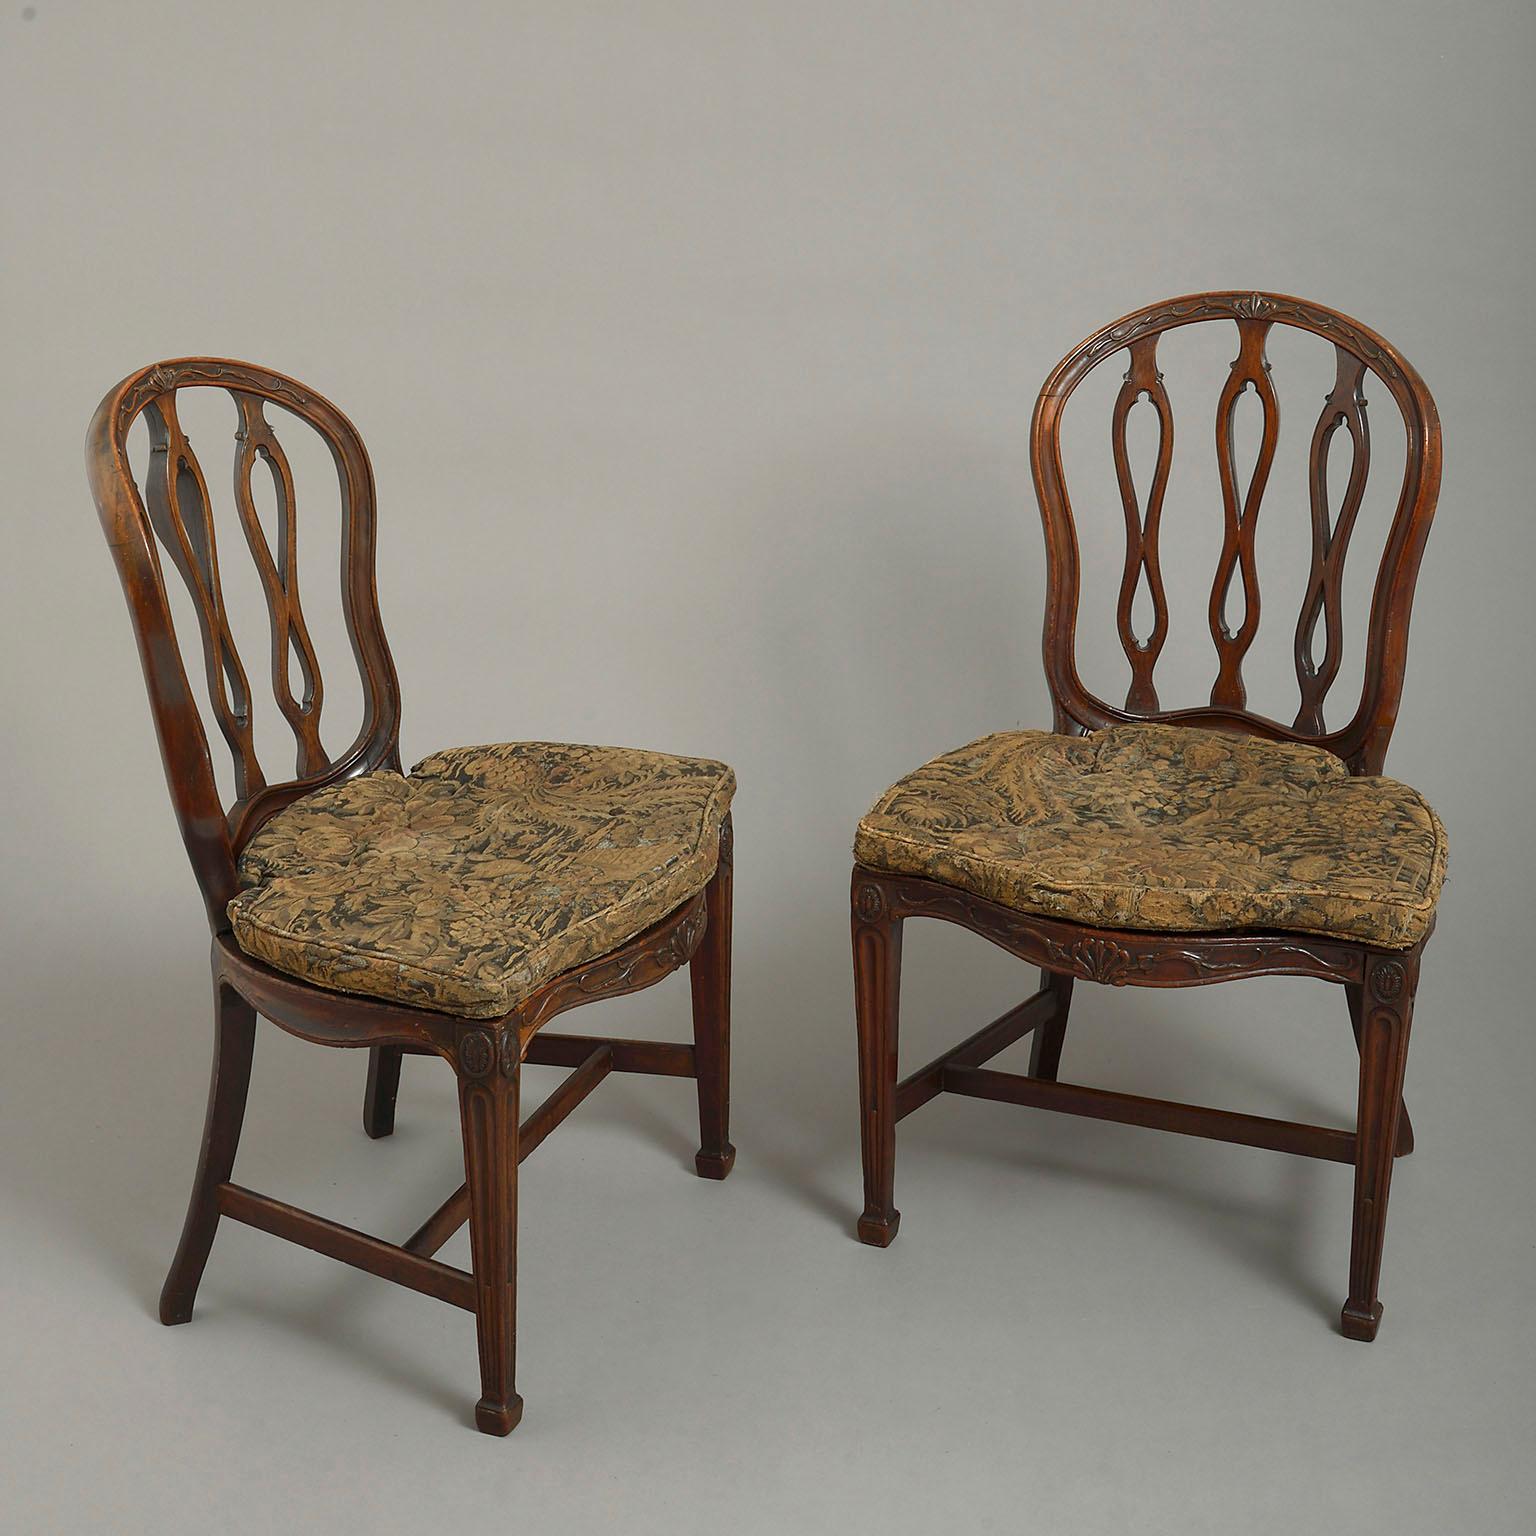 A pair of 18th century George III mahogany chairs in the manner of James Wyatt, the cartouche-shaped backs each with three pierced interlaced splats, the caned serpentine-fronted seats with conforming squabs and raised on square tapering legs.